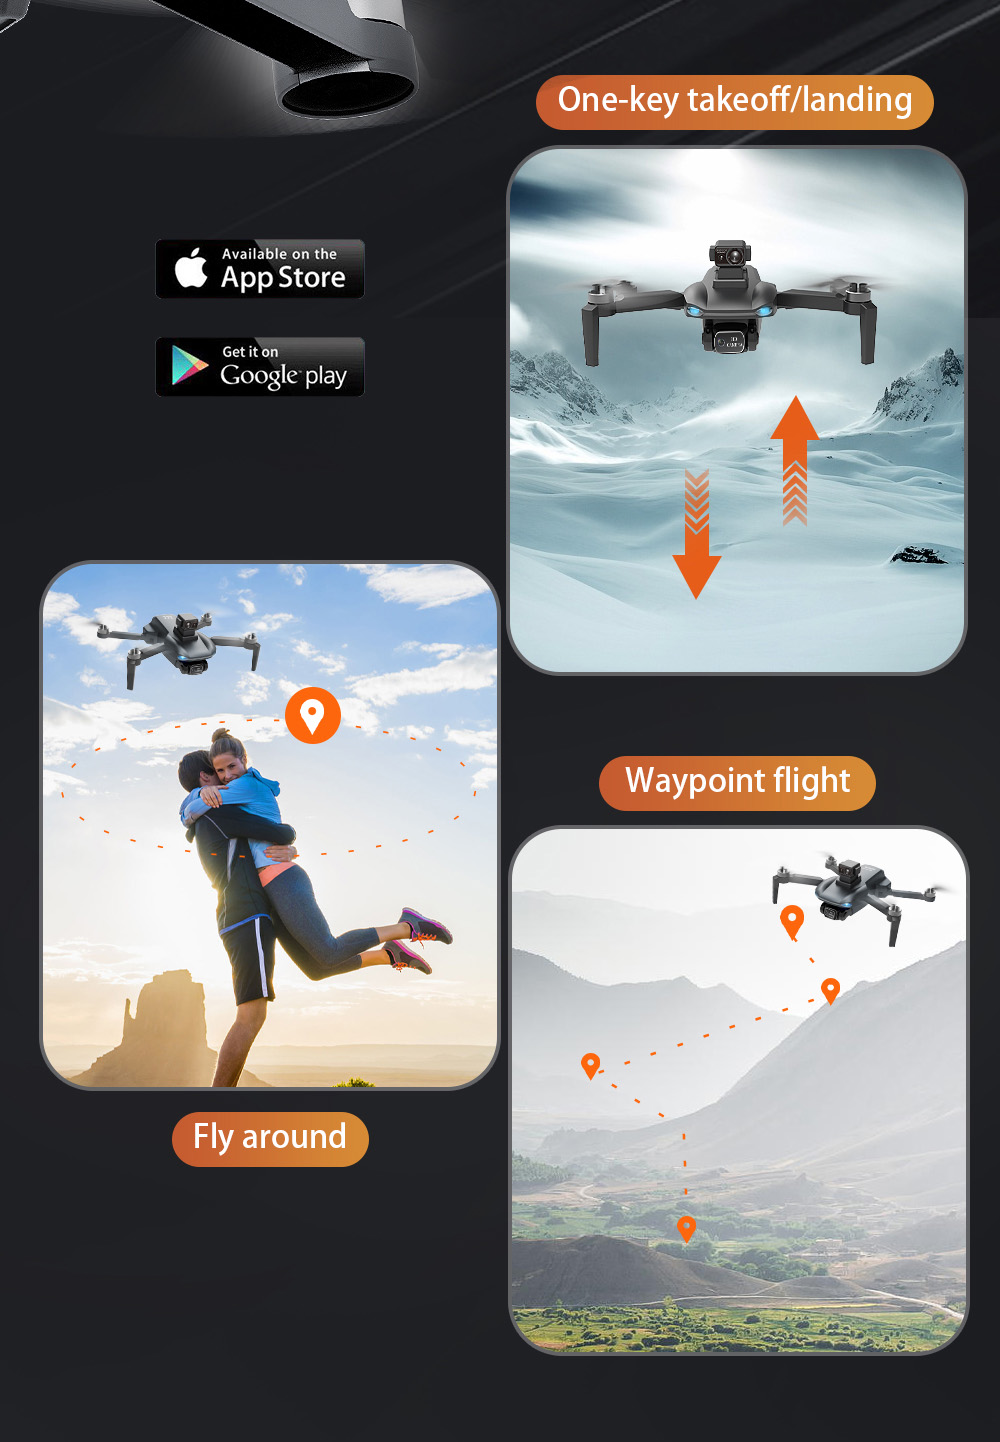 ZLL SG108MAX RC Drone GPS GLONASS 4K@25fps Adjustable Camera without Avoidance 20min Flight Time - Orange Two Batteries